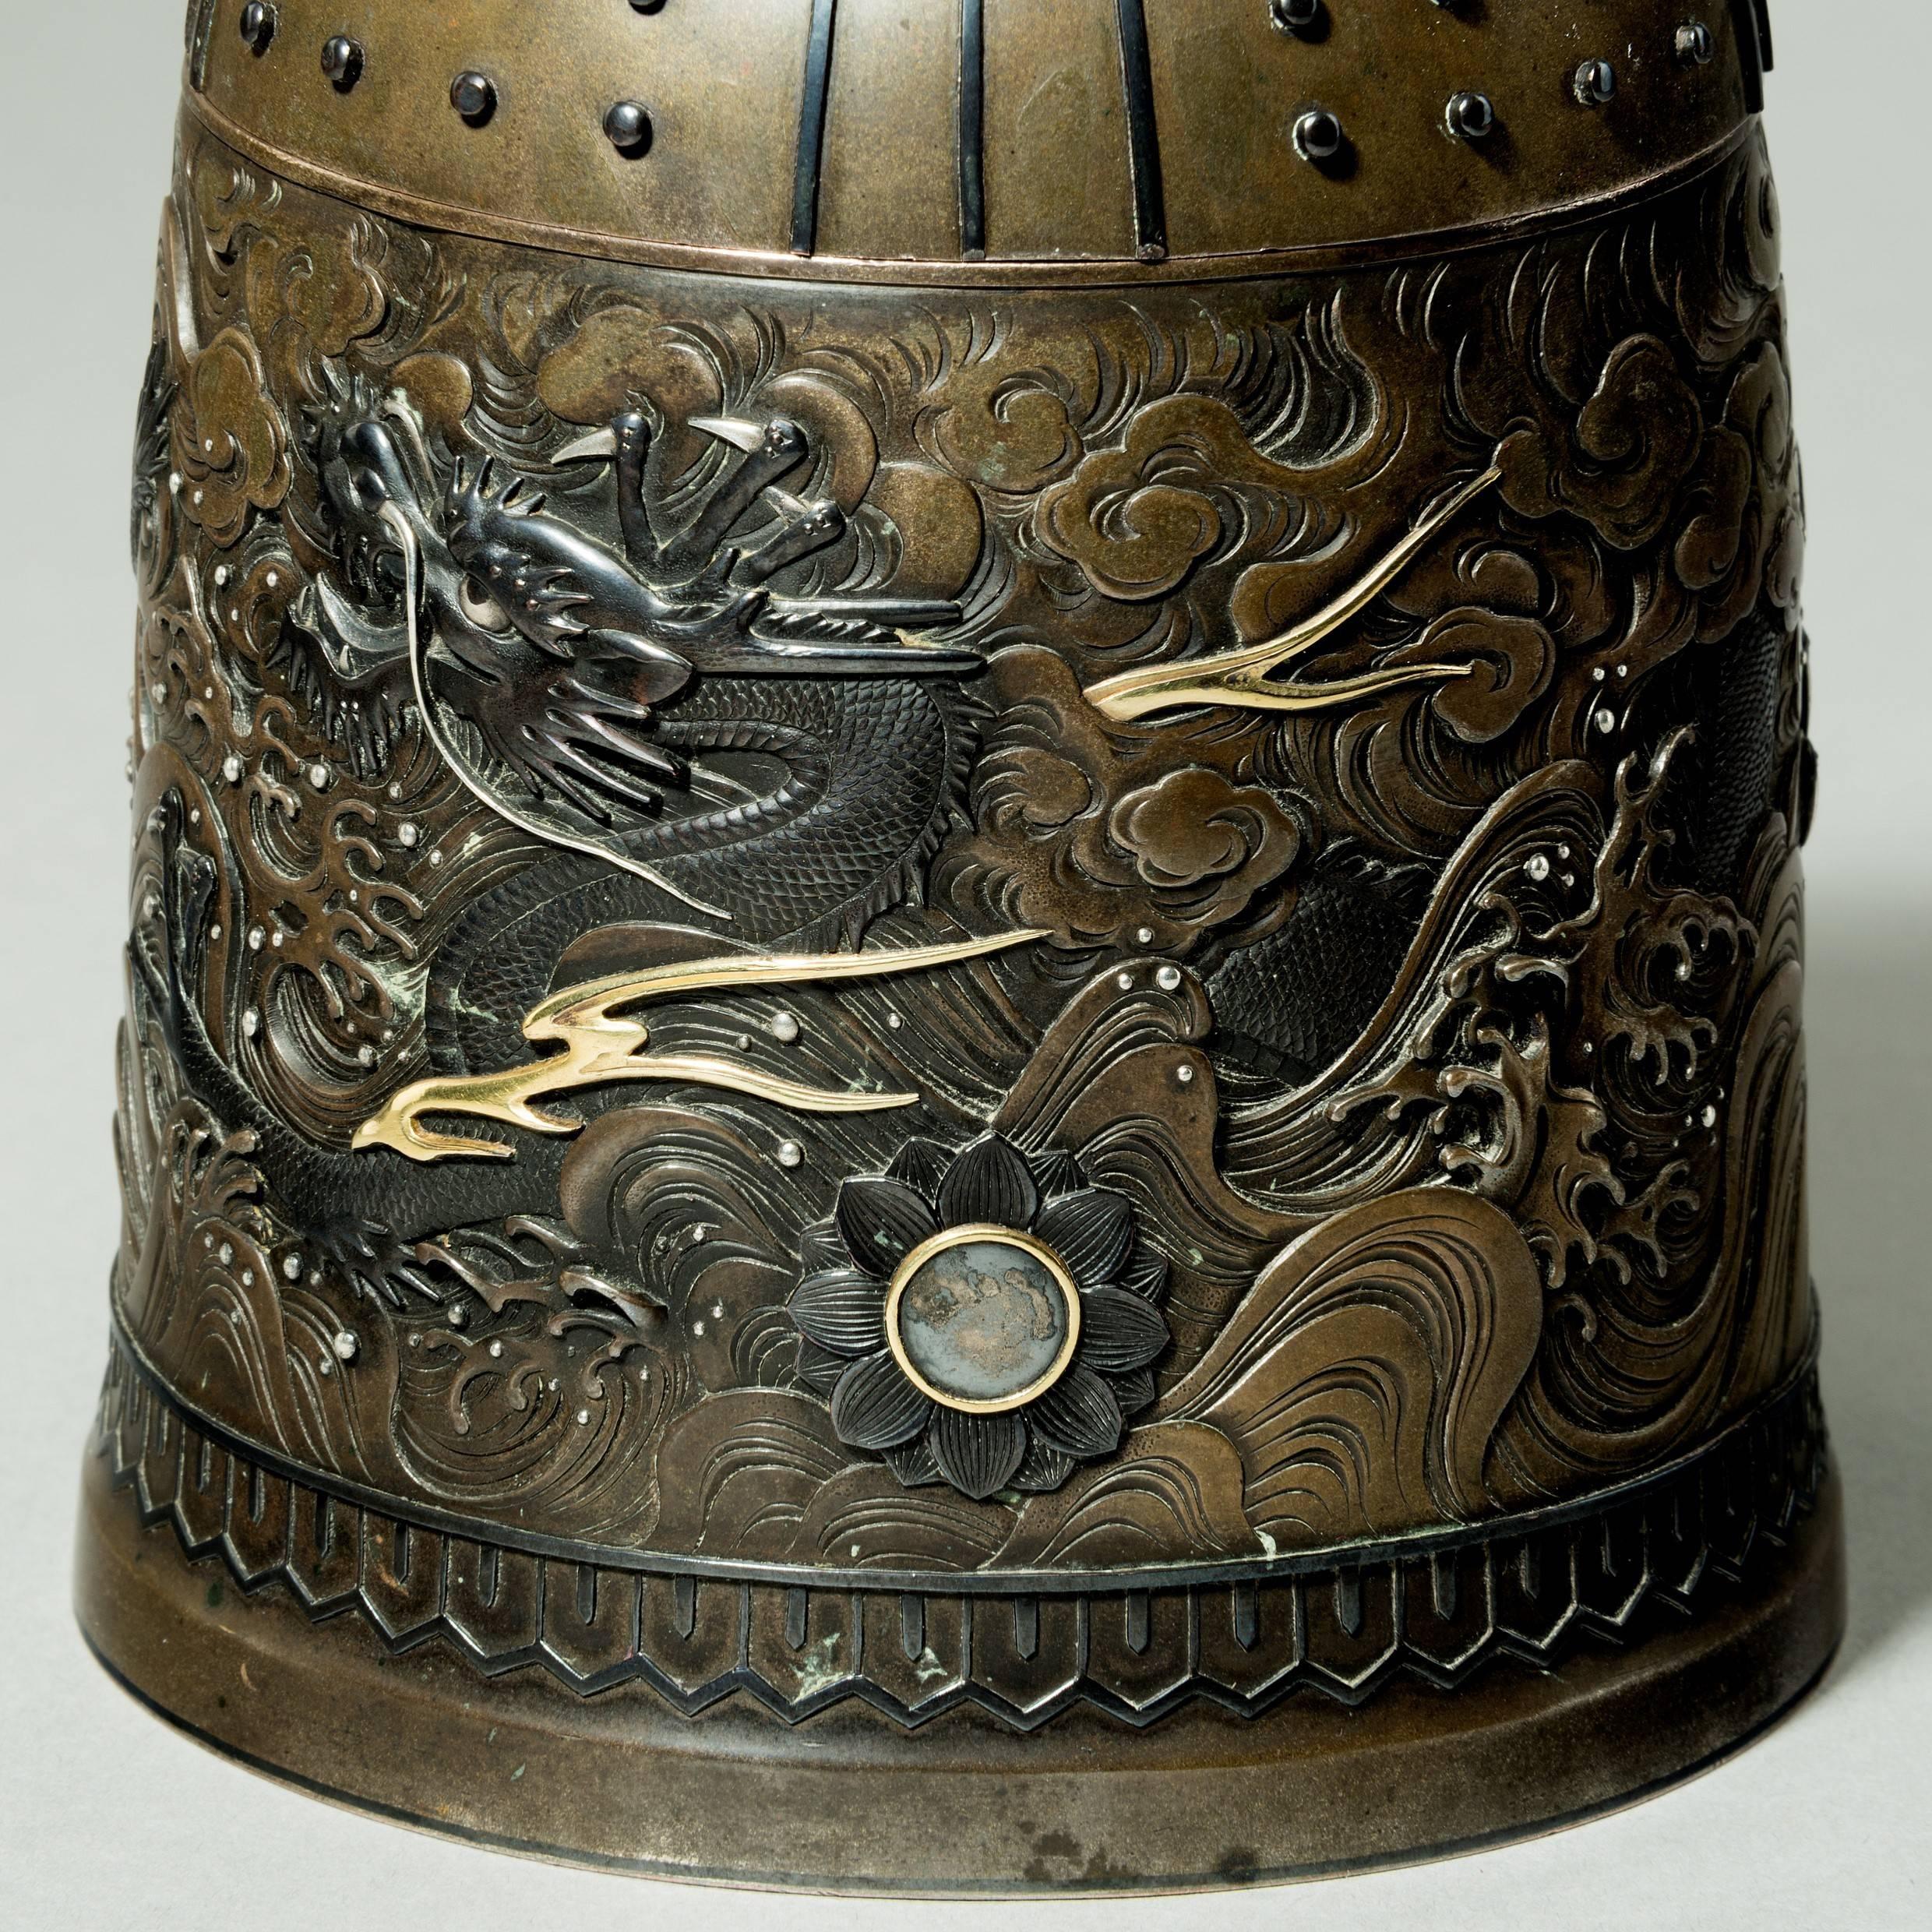 Outstanding Meiji Period Mixed Metal Bell Casket by the Nogowa Foundary In Good Condition For Sale In Lymington, Hampshire